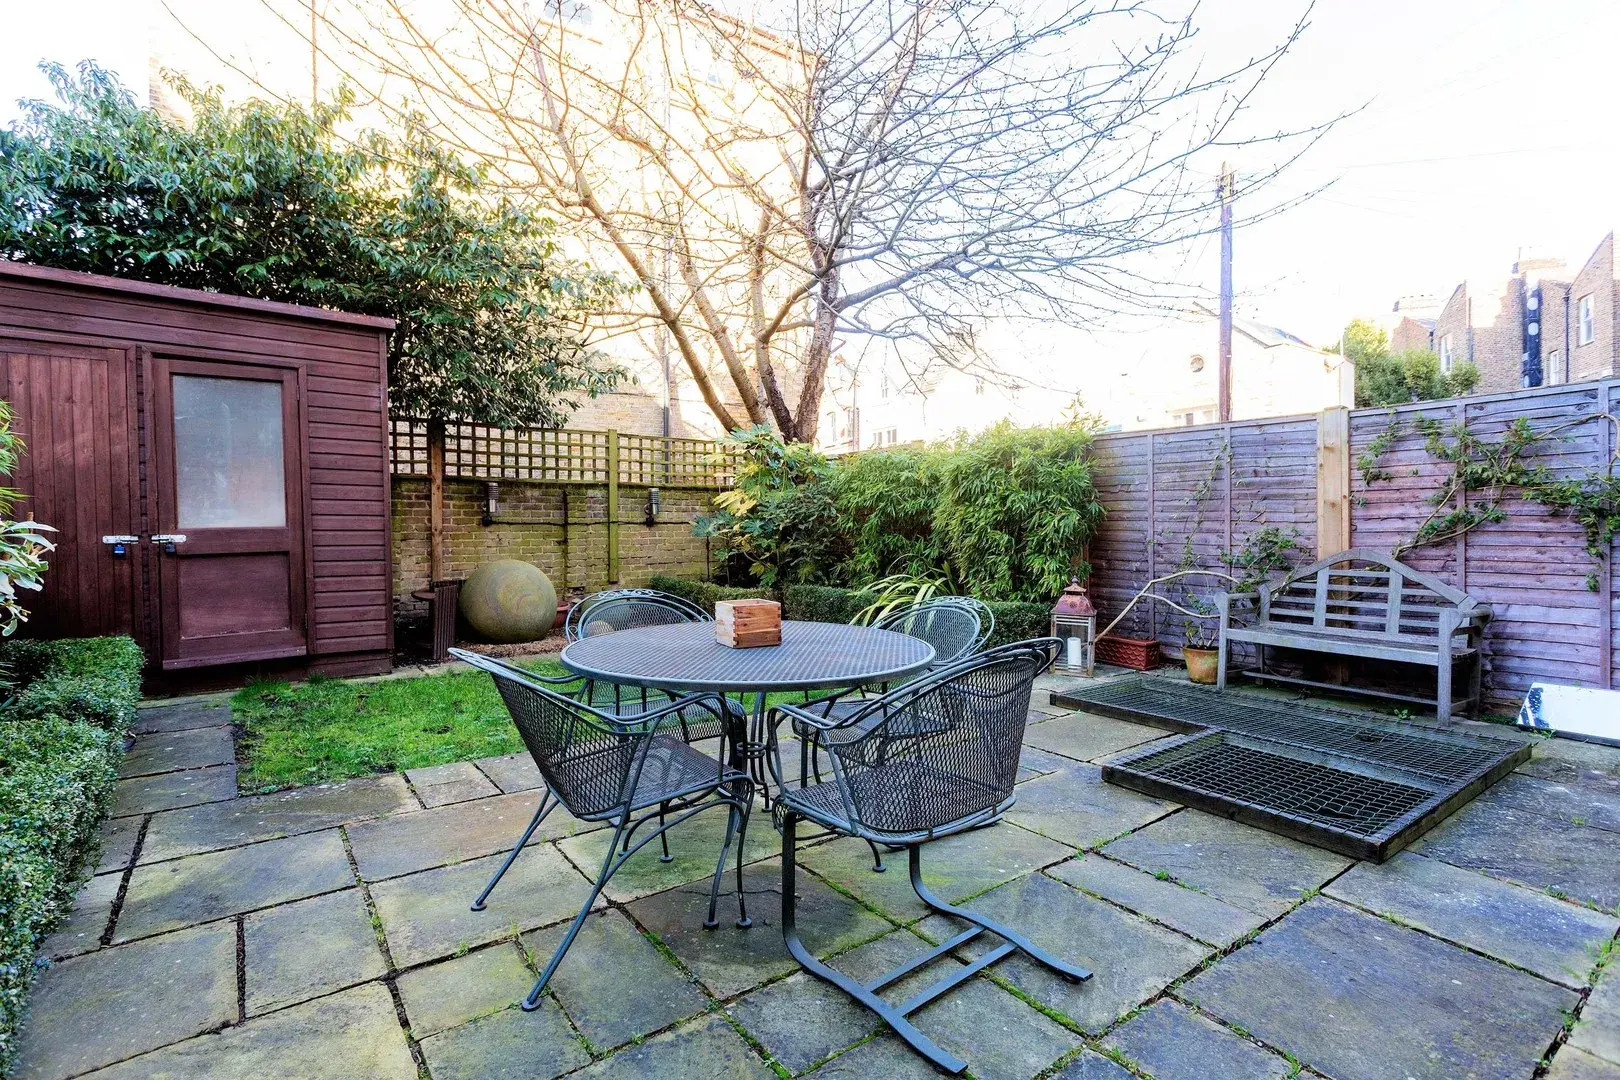 The Ridgway, holiday home in Wimbledon – South London, London